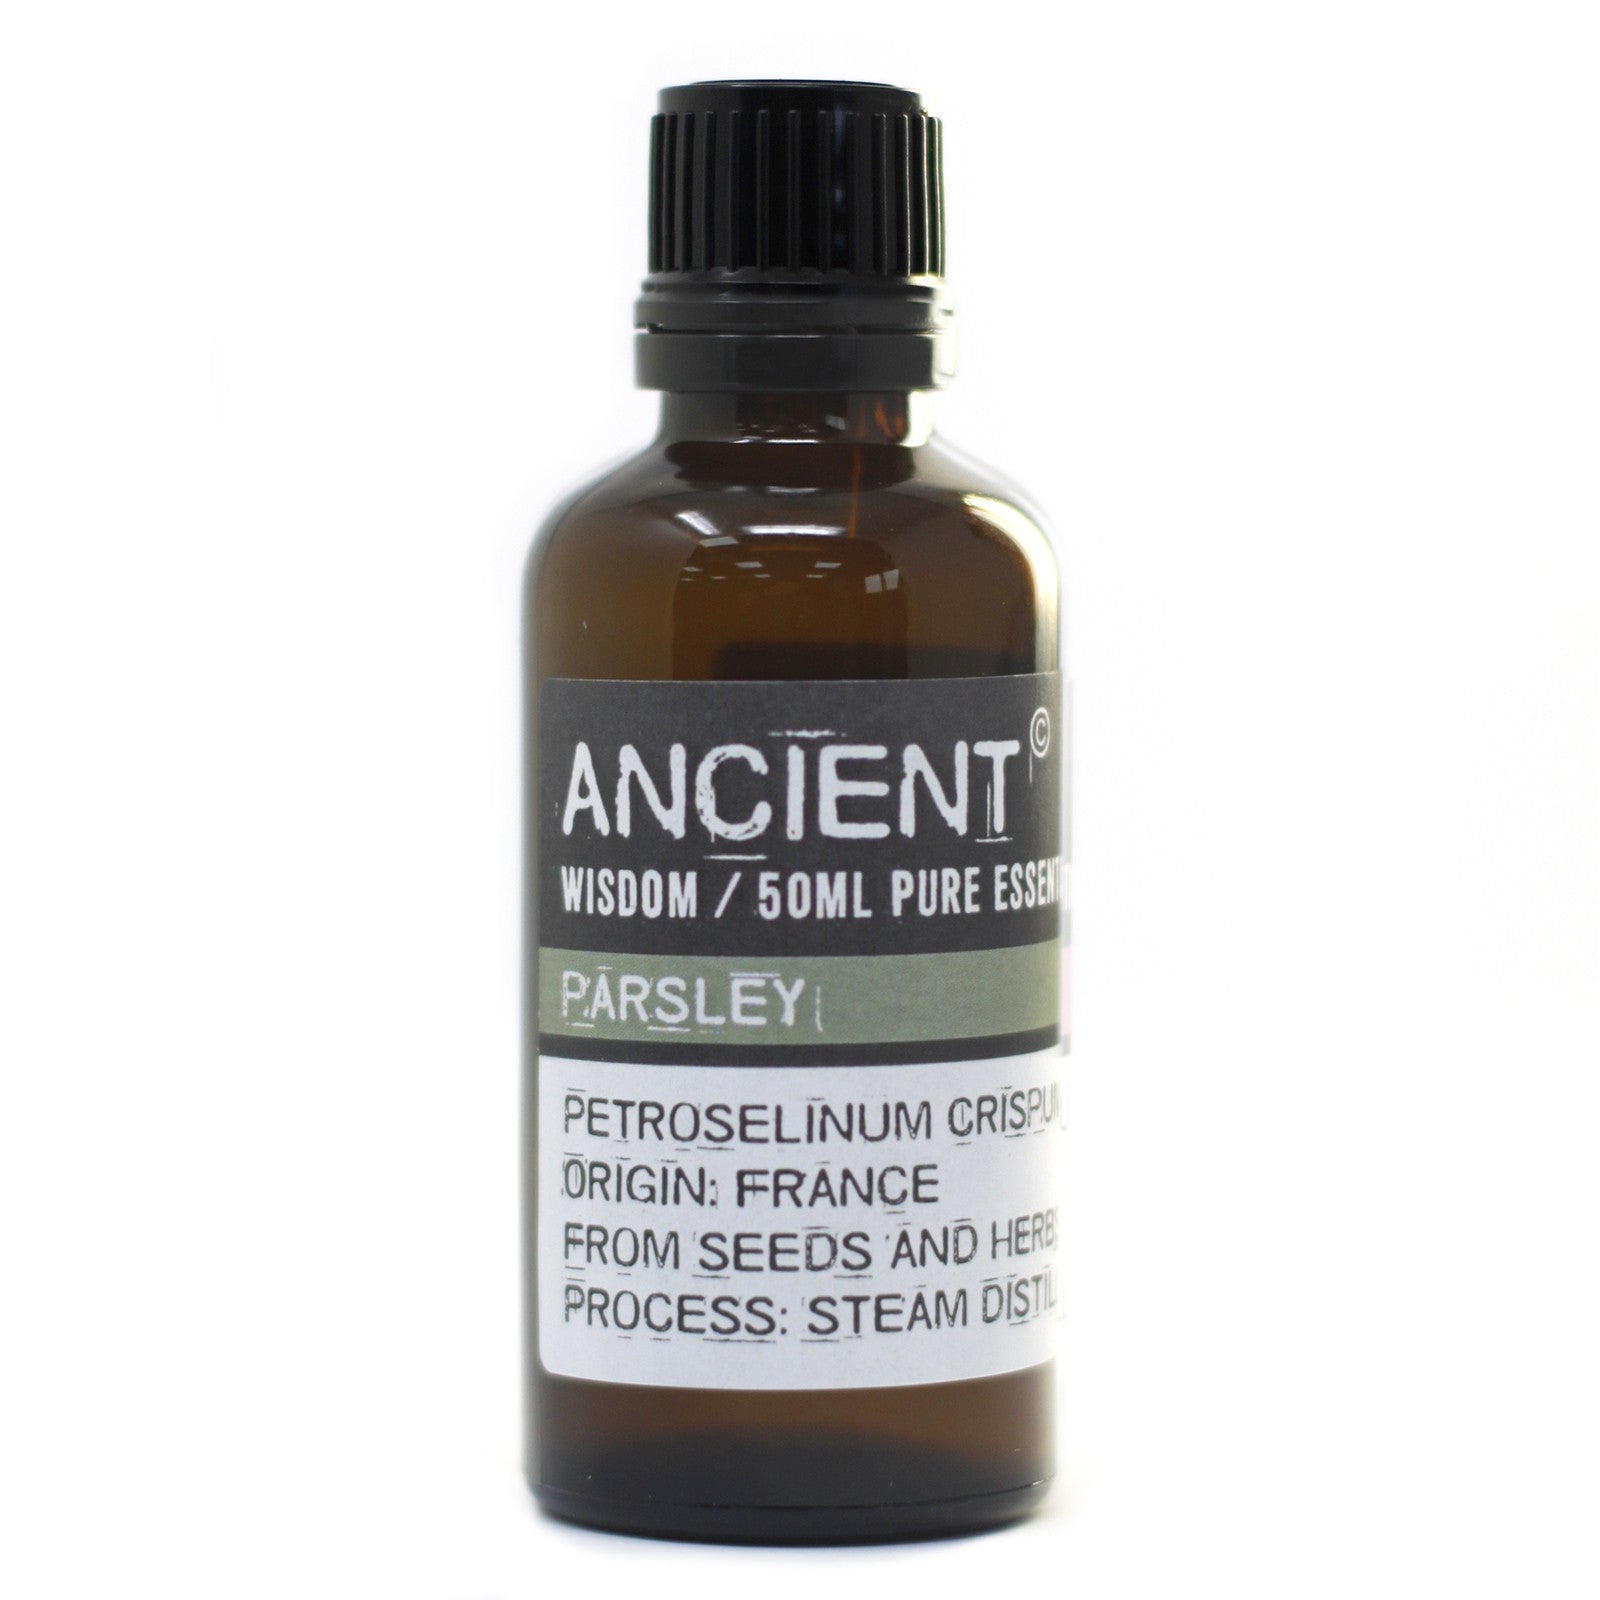 View Parsley 50ml information